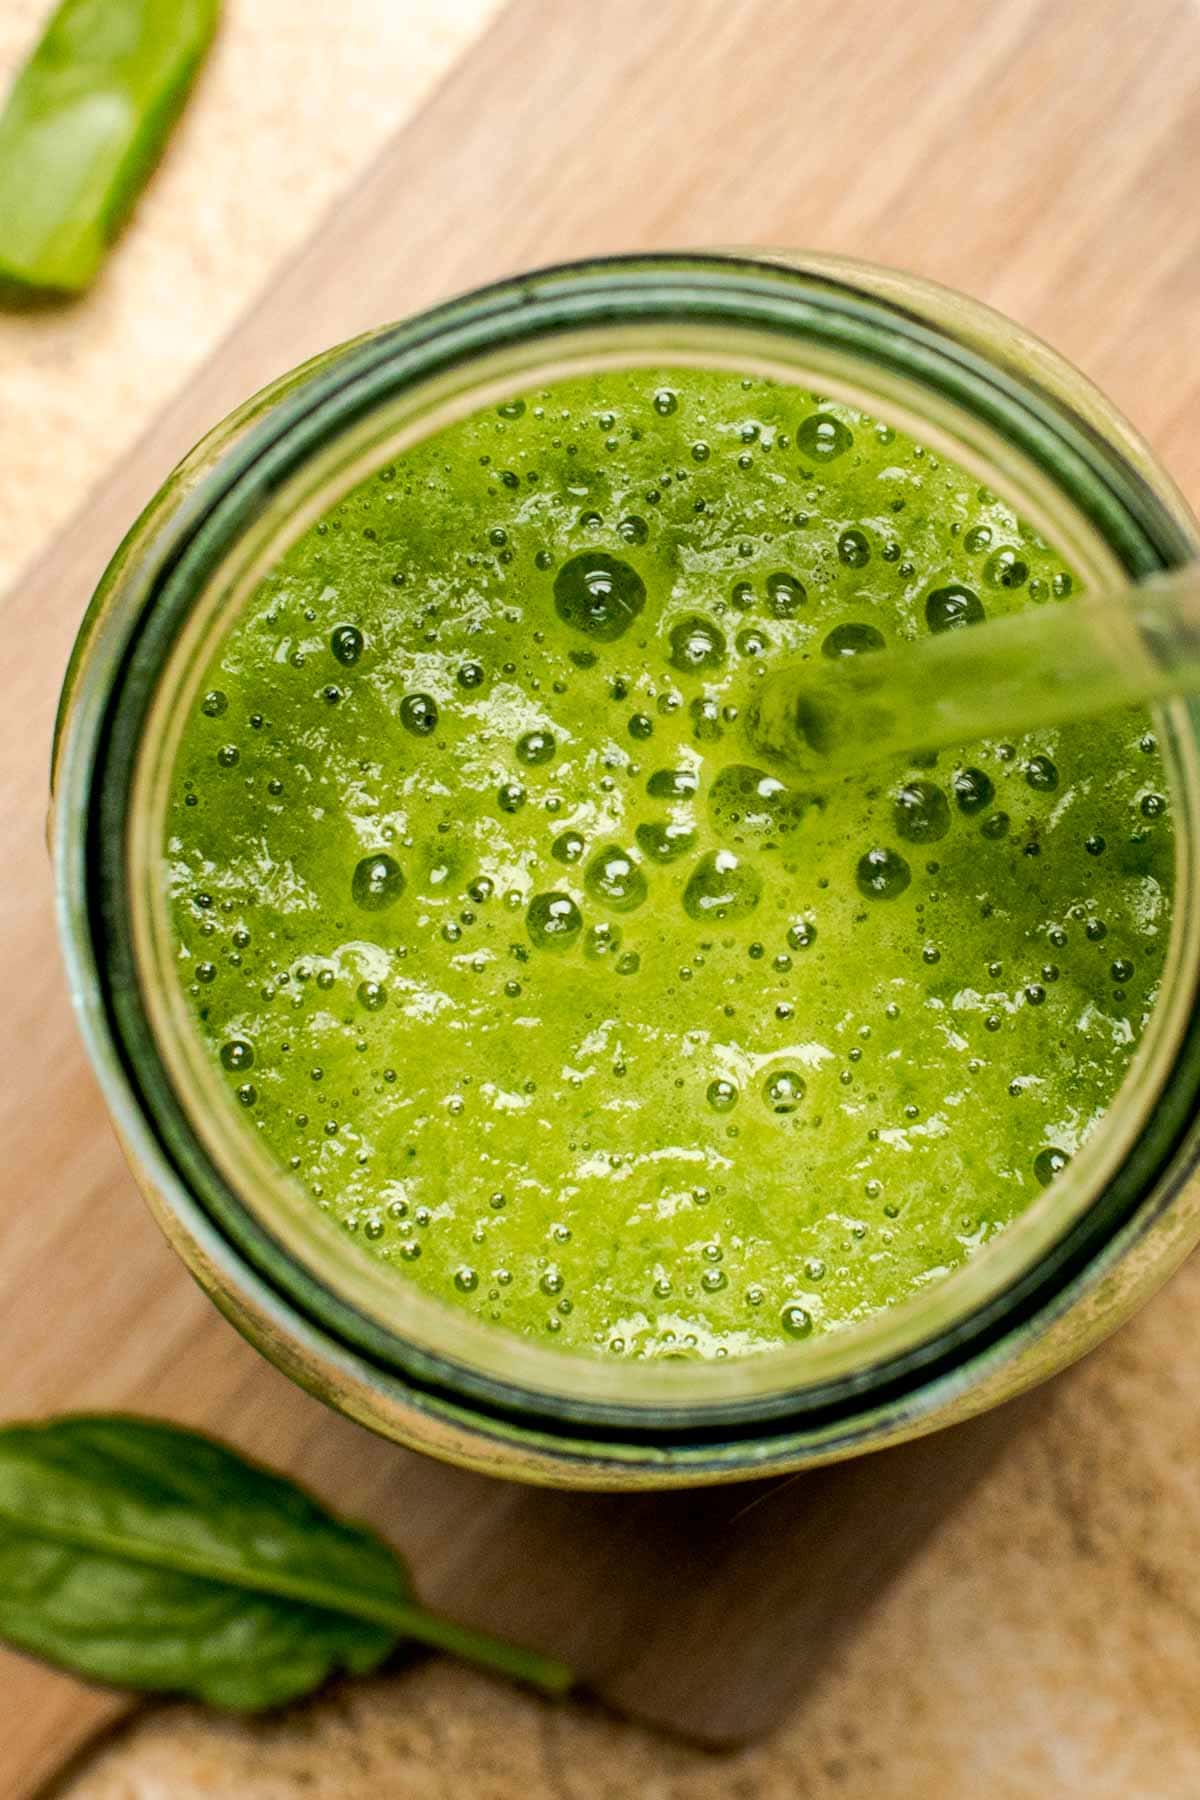 A close-up overhead view of green smoothie in a glass.